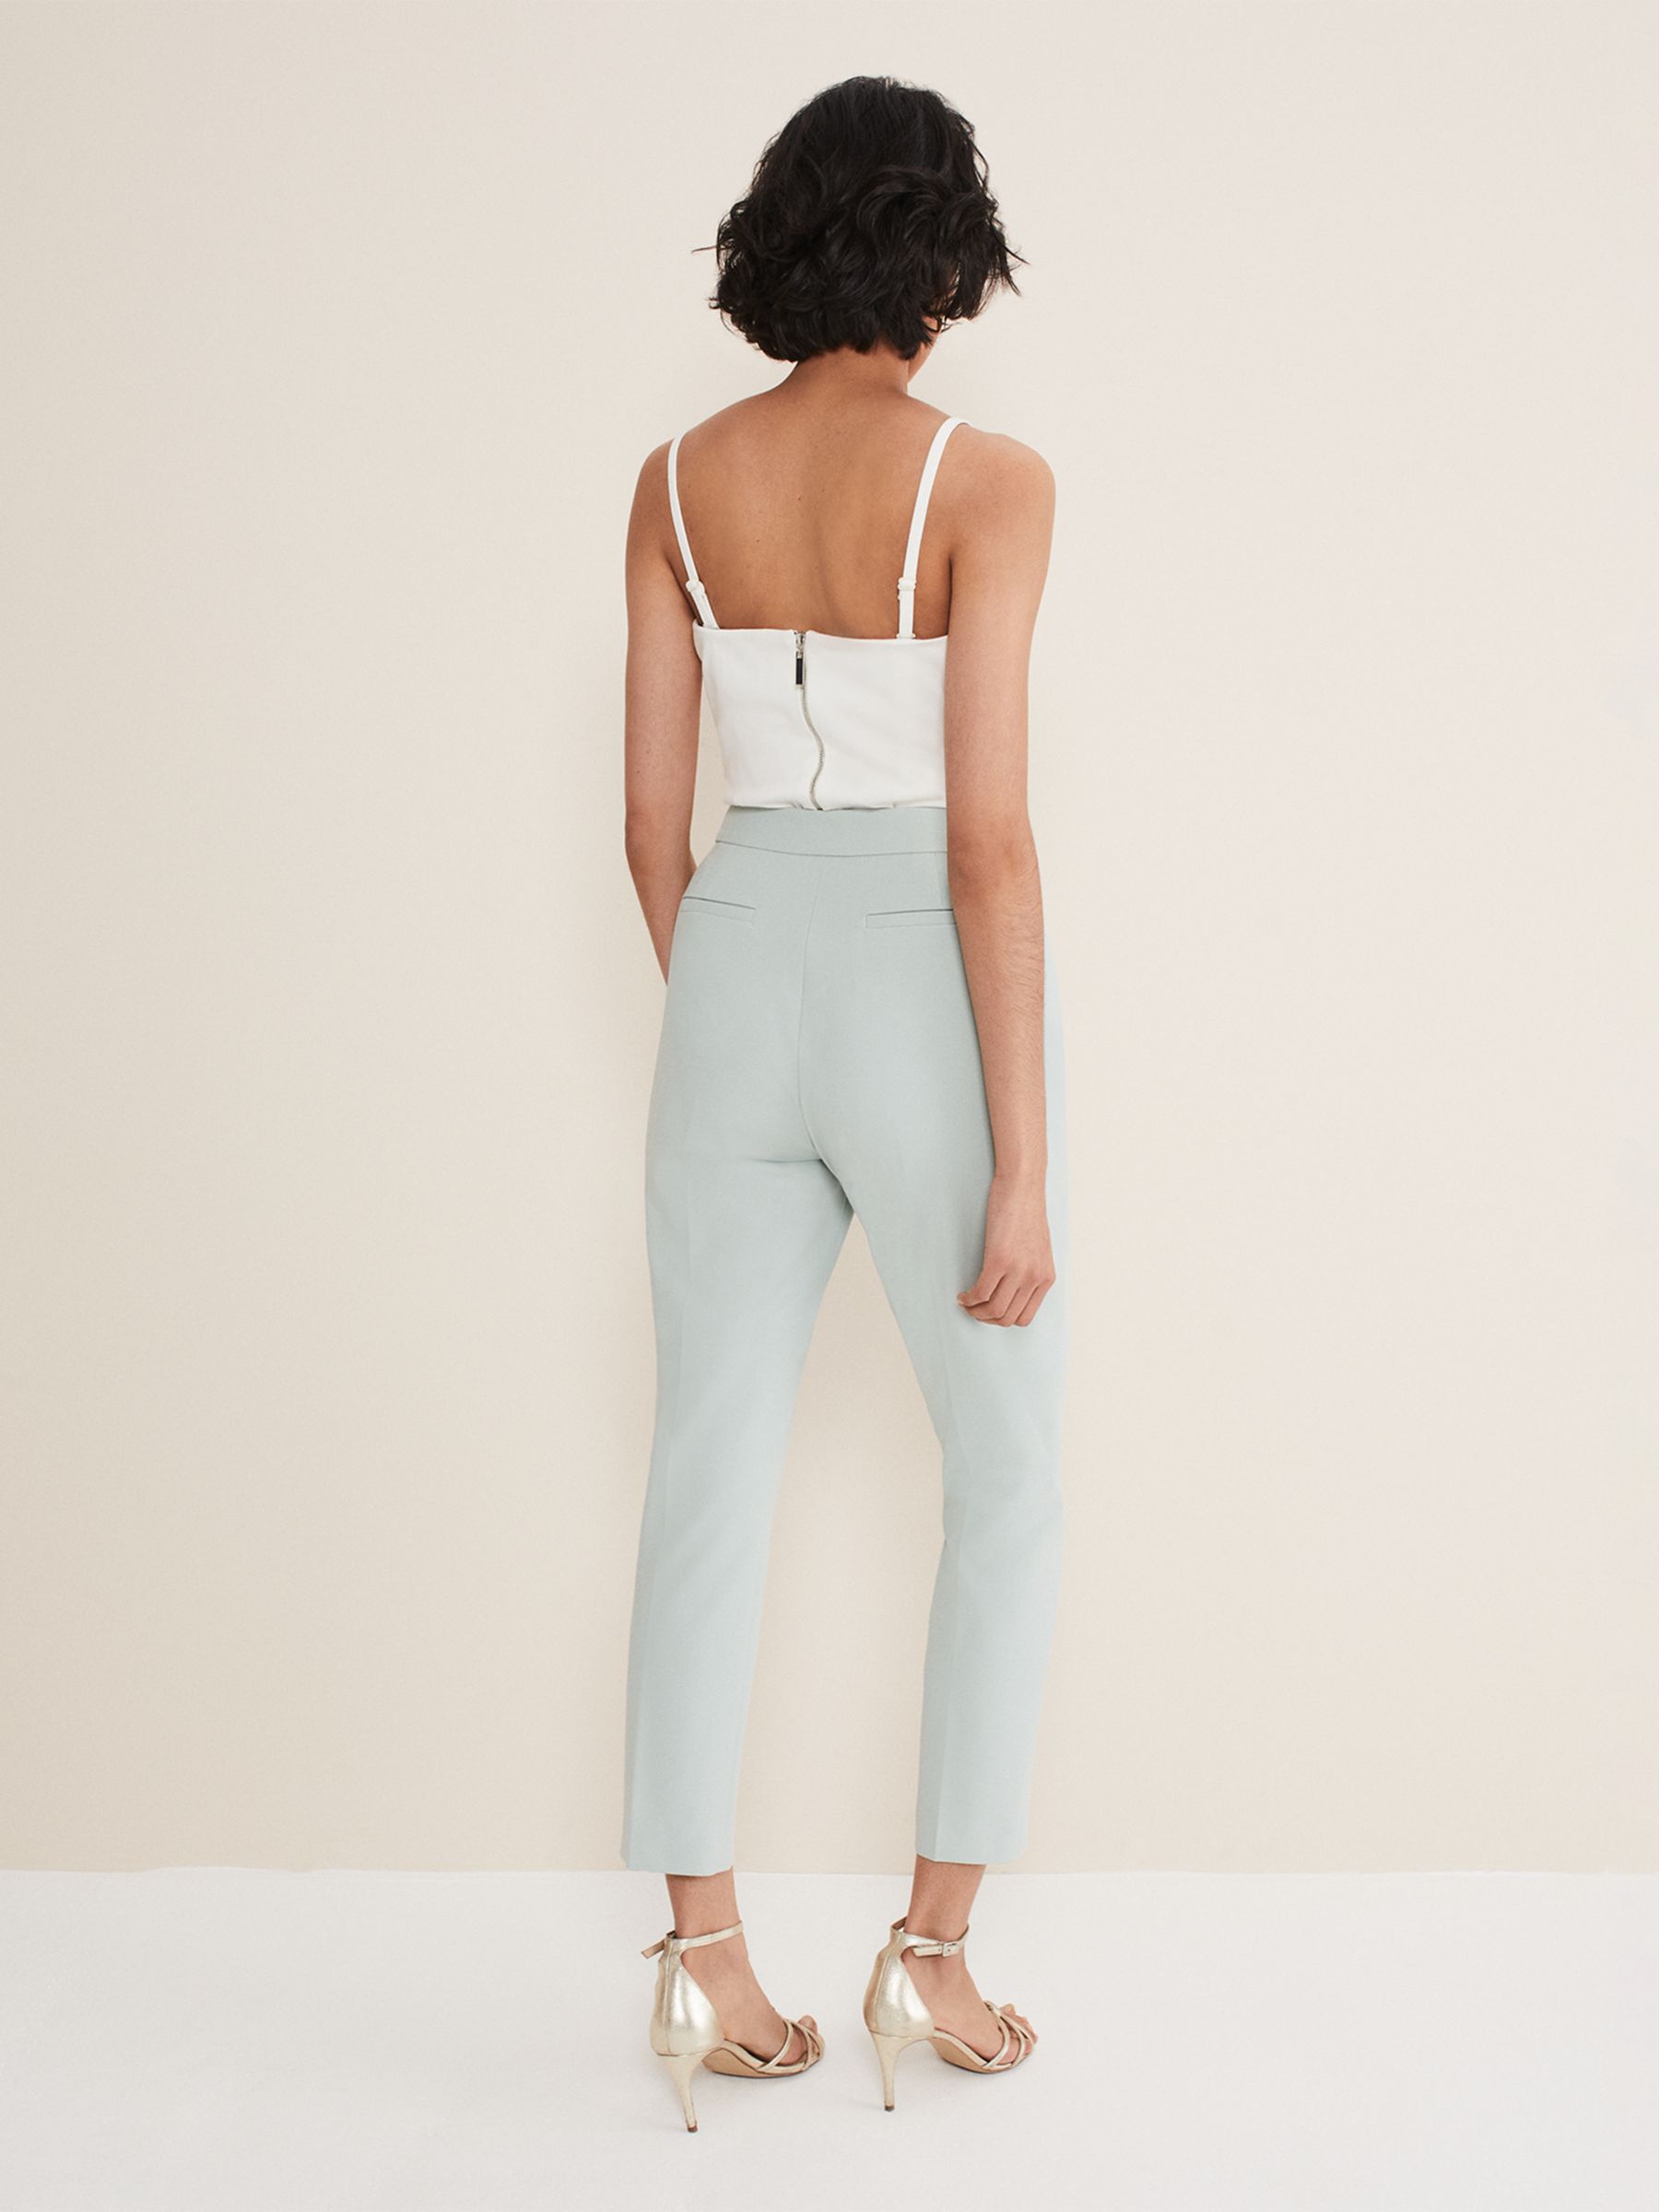 Buy Phase Eight Eira Cigarette Trousers Online at johnlewis.com